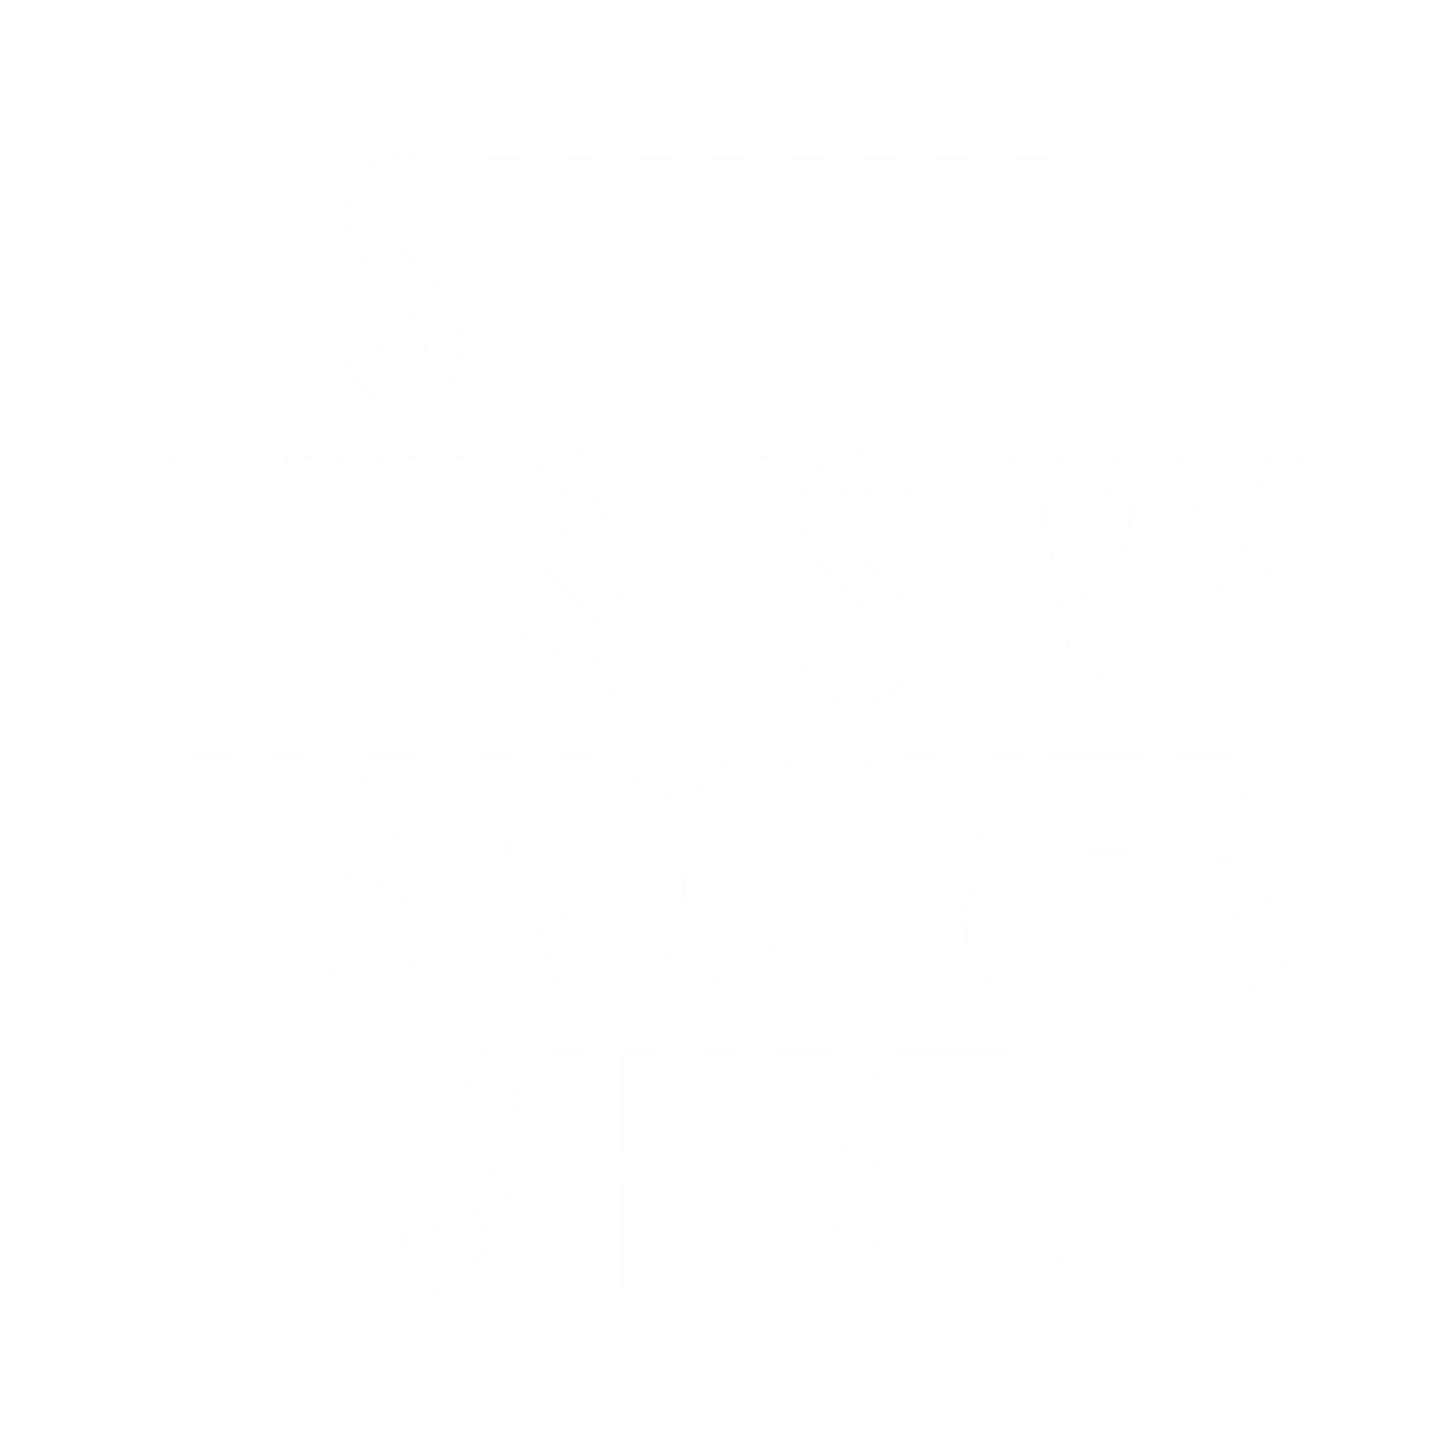 Funny T-Shirts design "SHHHH, This Is My Hangover Shirt."